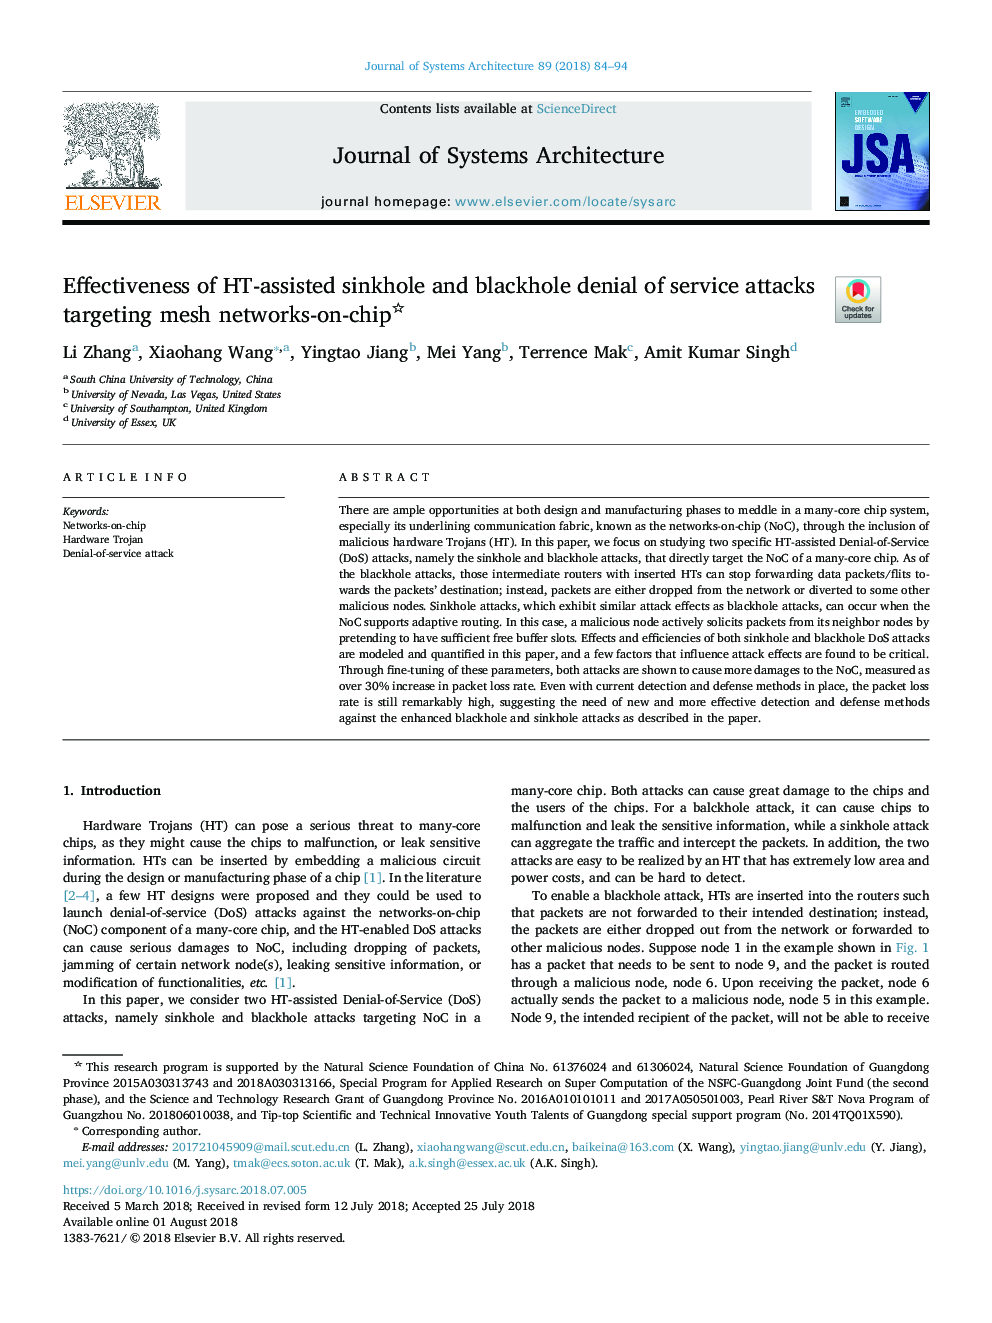 Effectiveness of HT-assisted sinkhole and blackhole denial of service attacks targeting mesh networks-on-chip